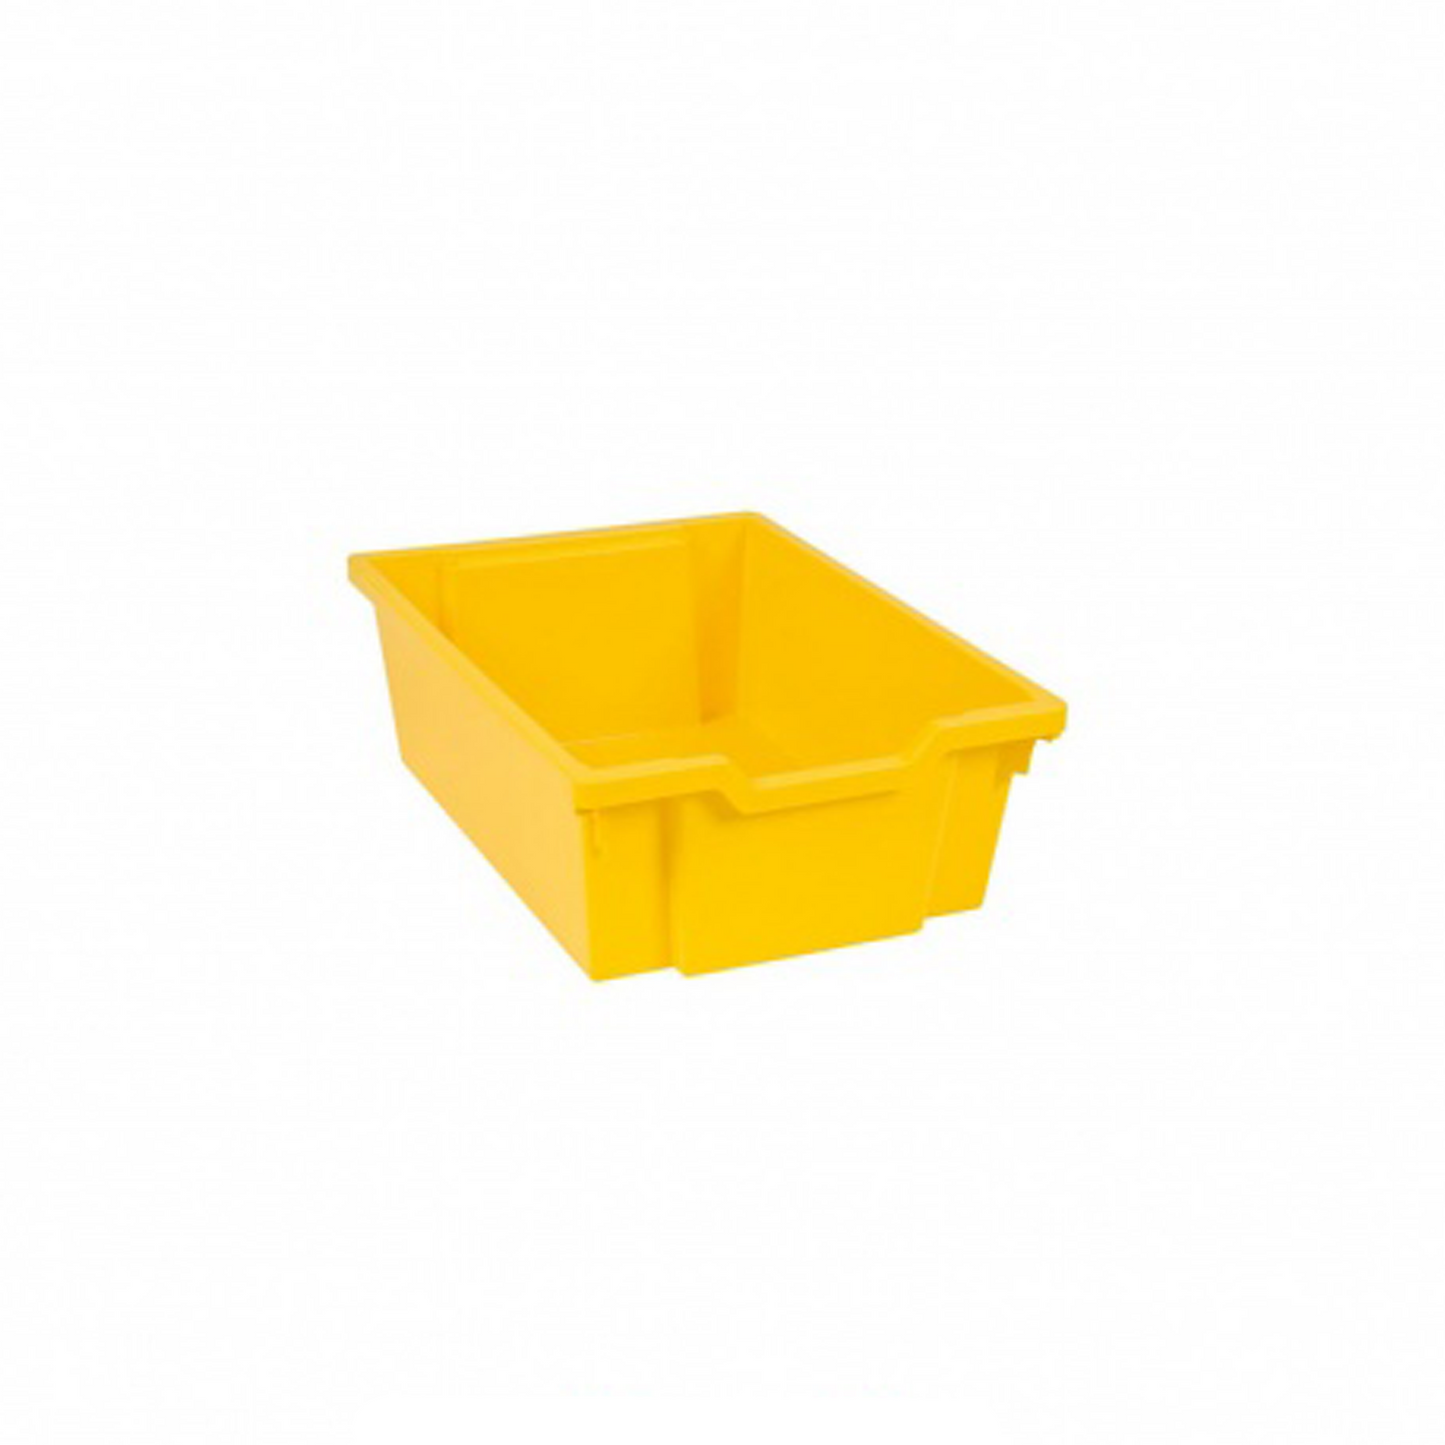 Drawer (including rails): yellow - 15 cm